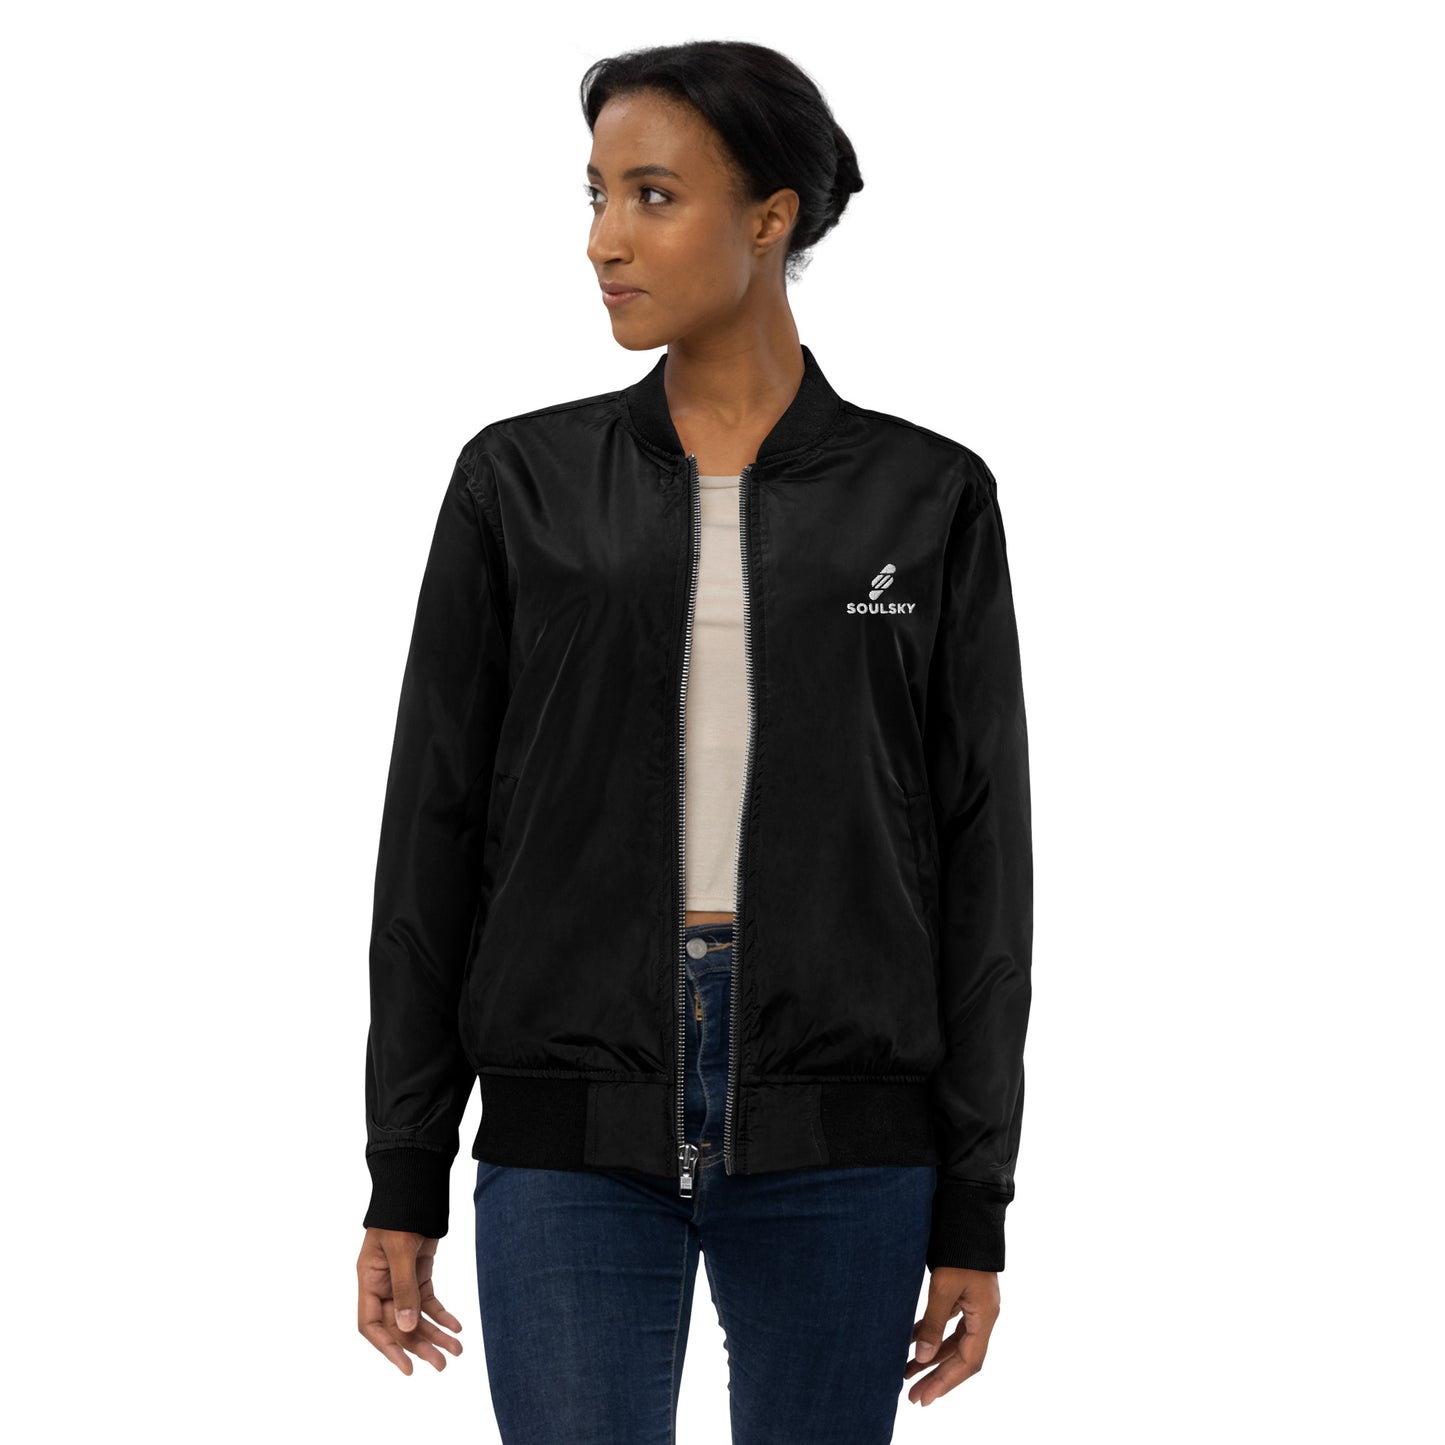 YOU ARE NOT ALONE Premium Bomber Jacket